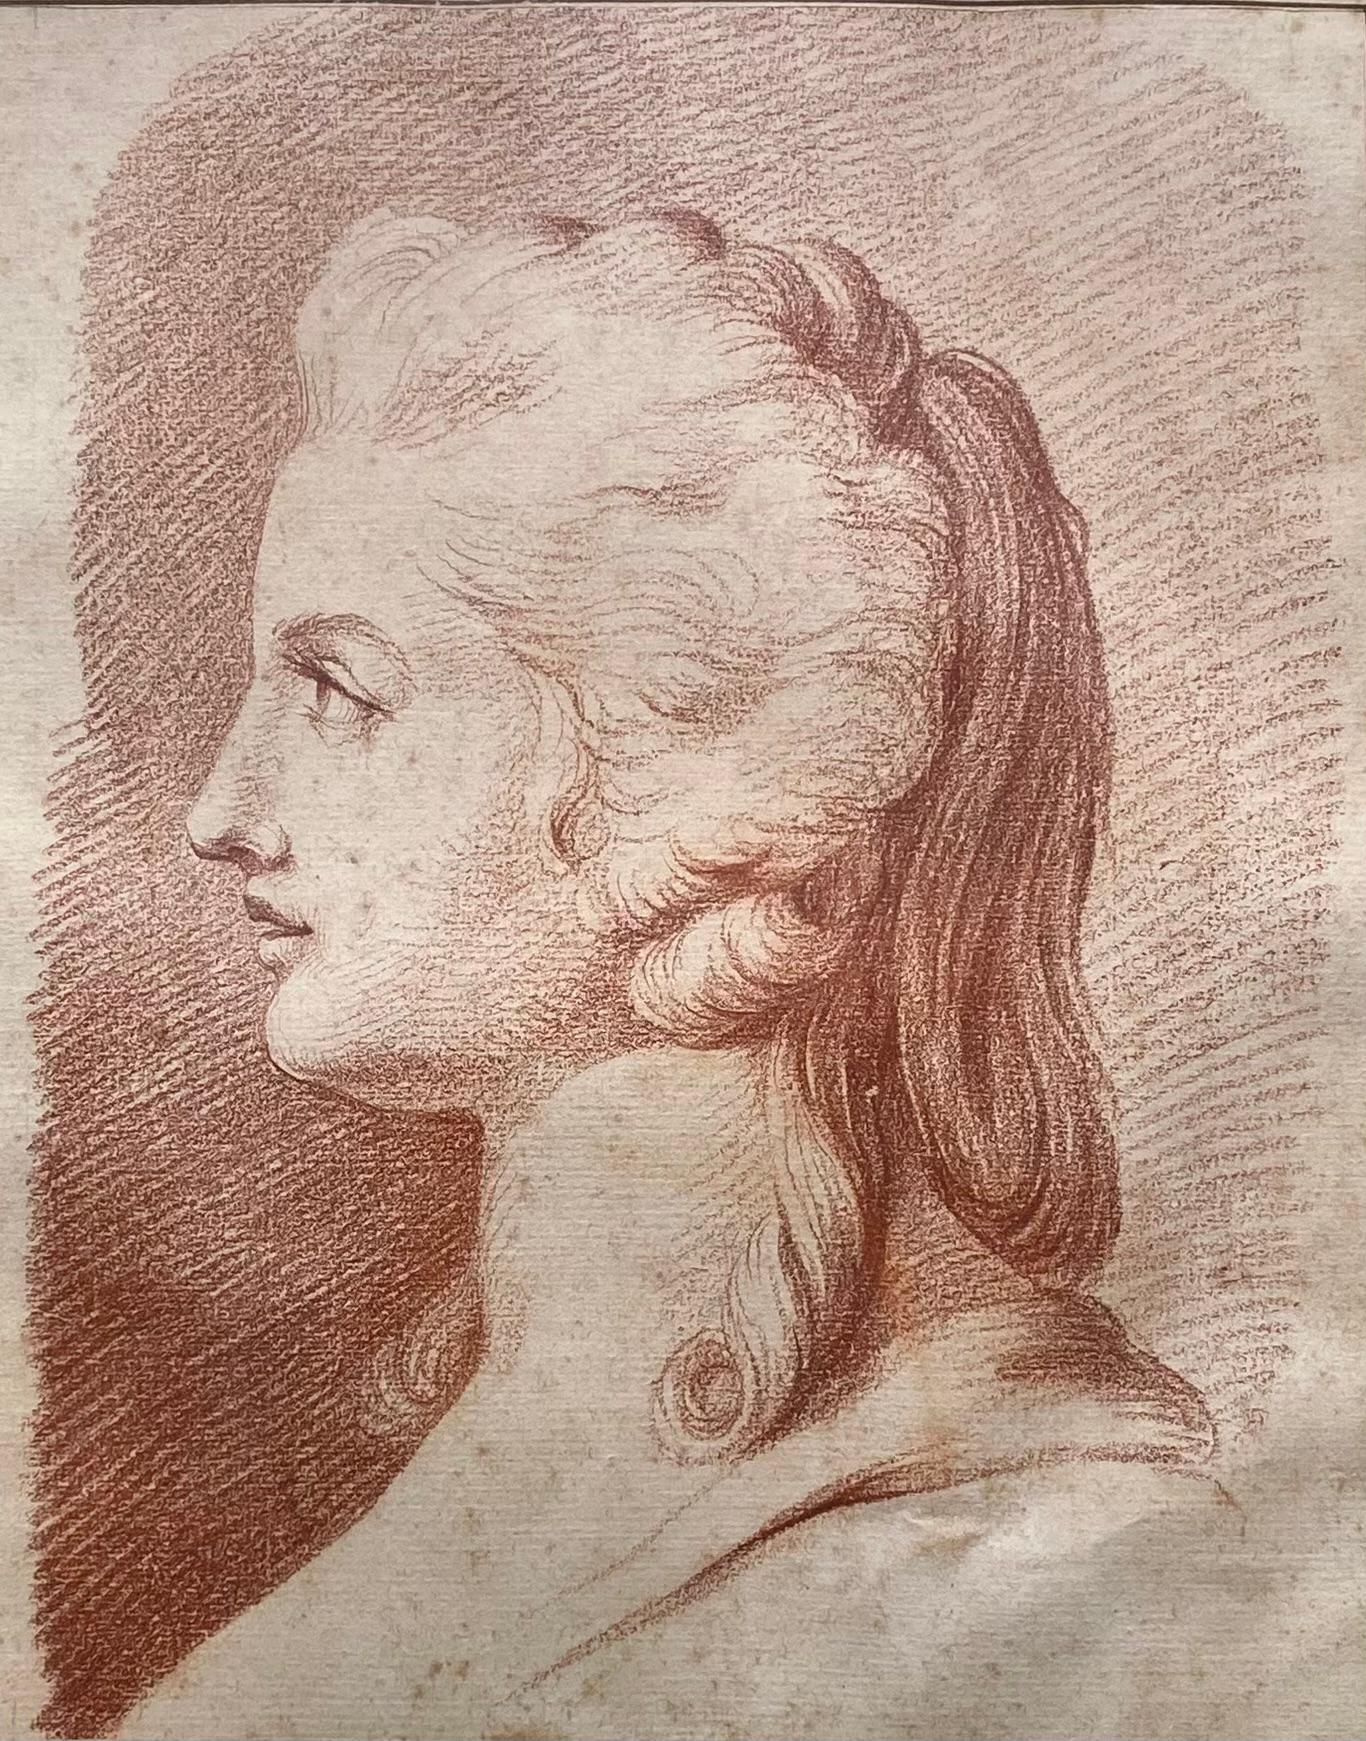 Bust Of A Woman In Profile, Sanguine On Paper, Signed And Dated - Art by Nicolas-André Courtois